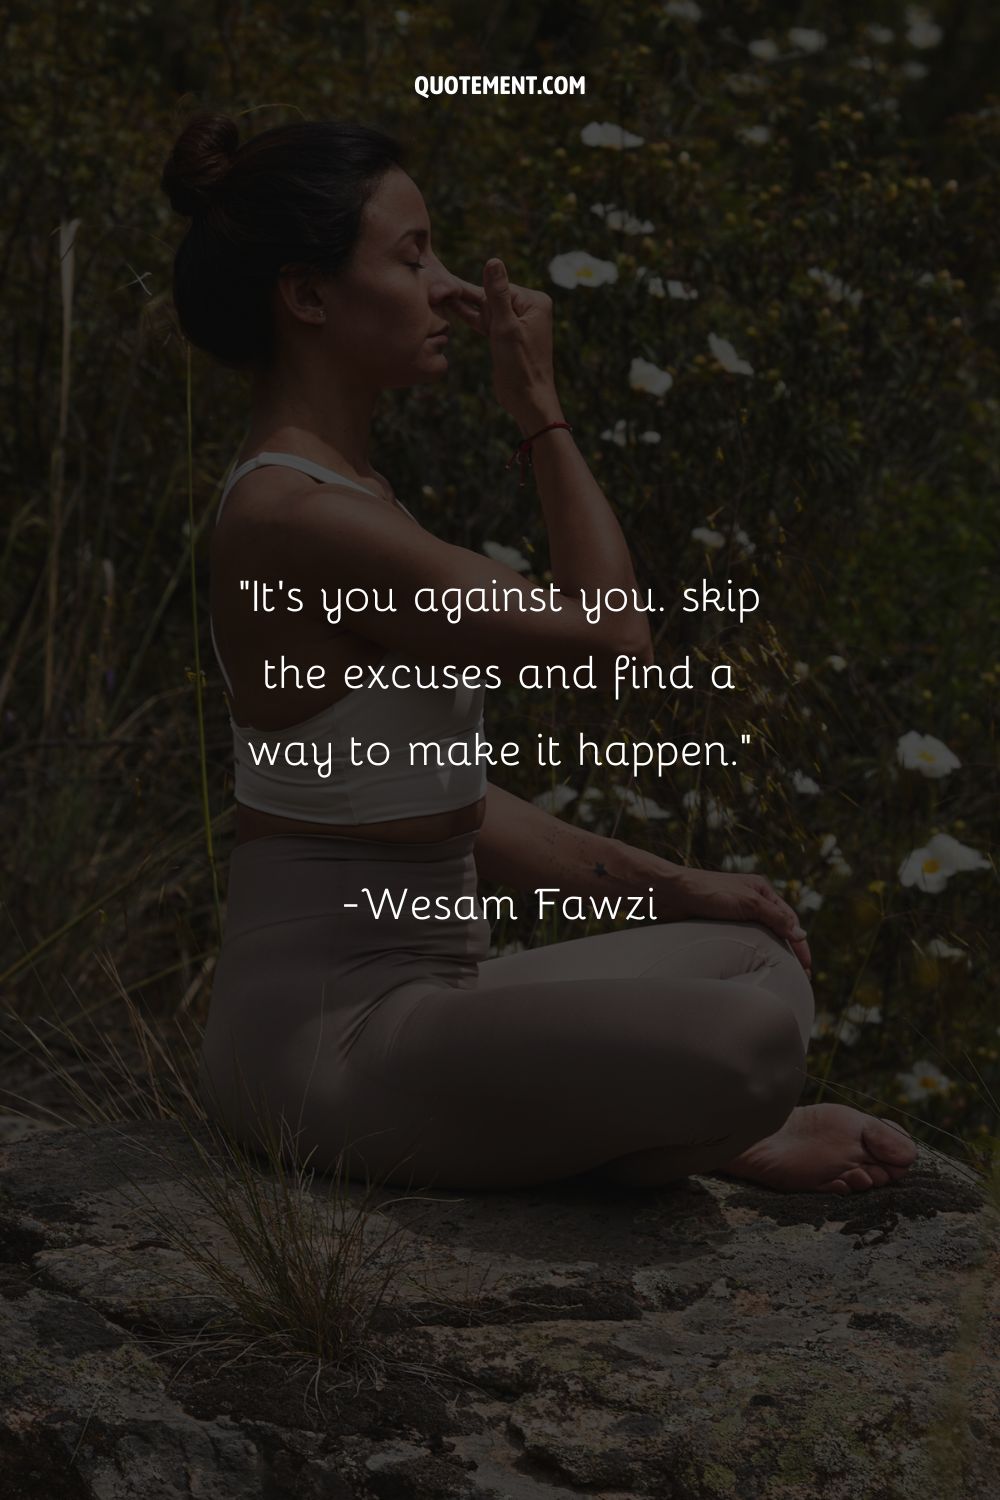 It's you against you. skip the excuses and find a way to make it happen